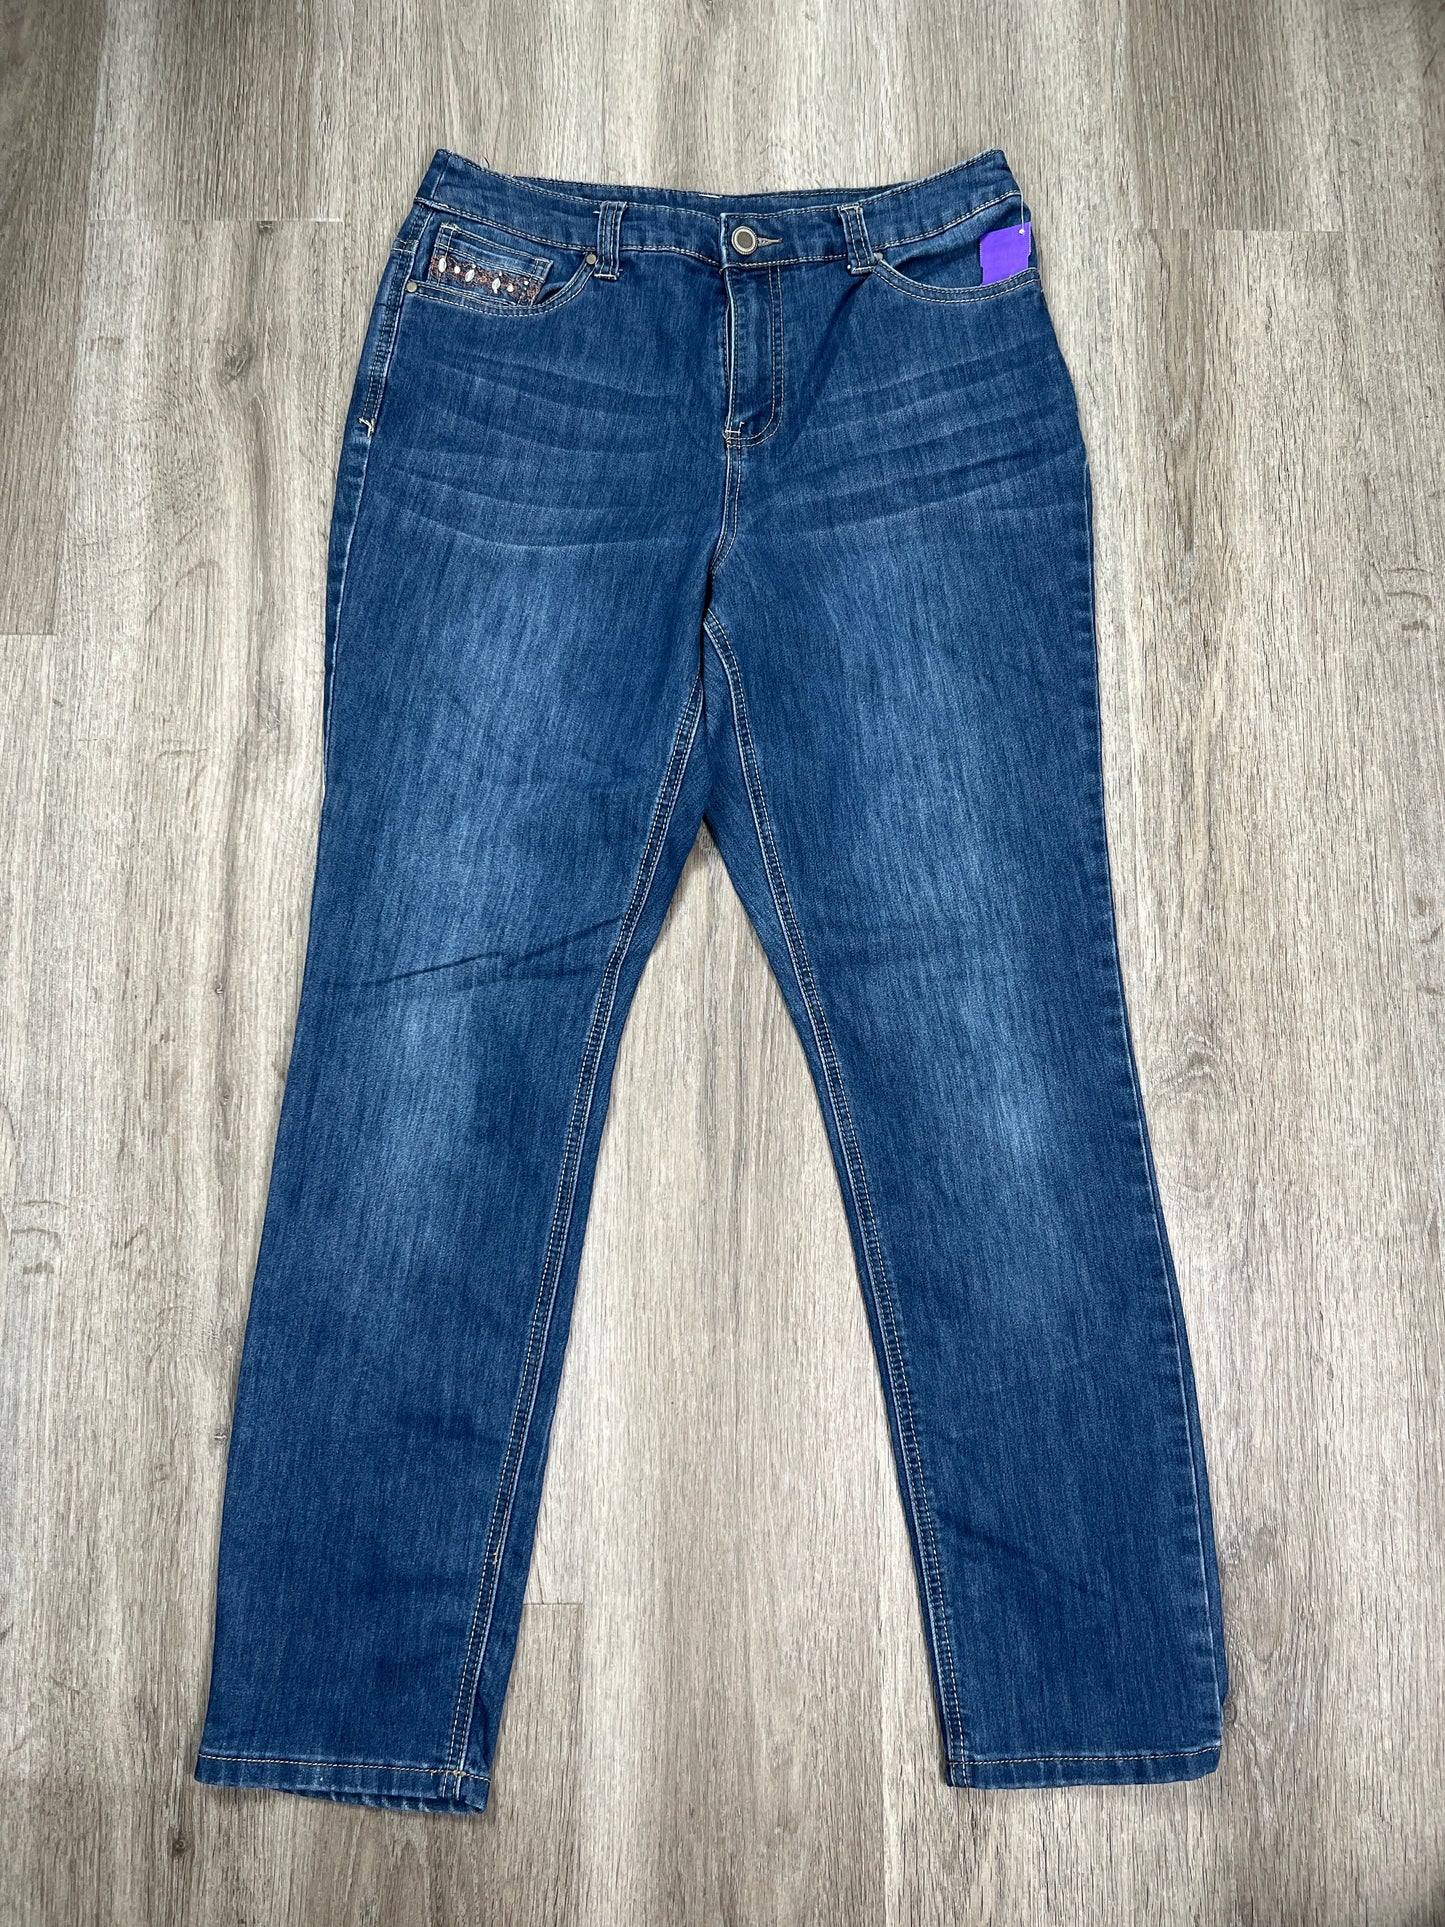 Blue Denim Jeans Straight Christopher And Banks, Size 10